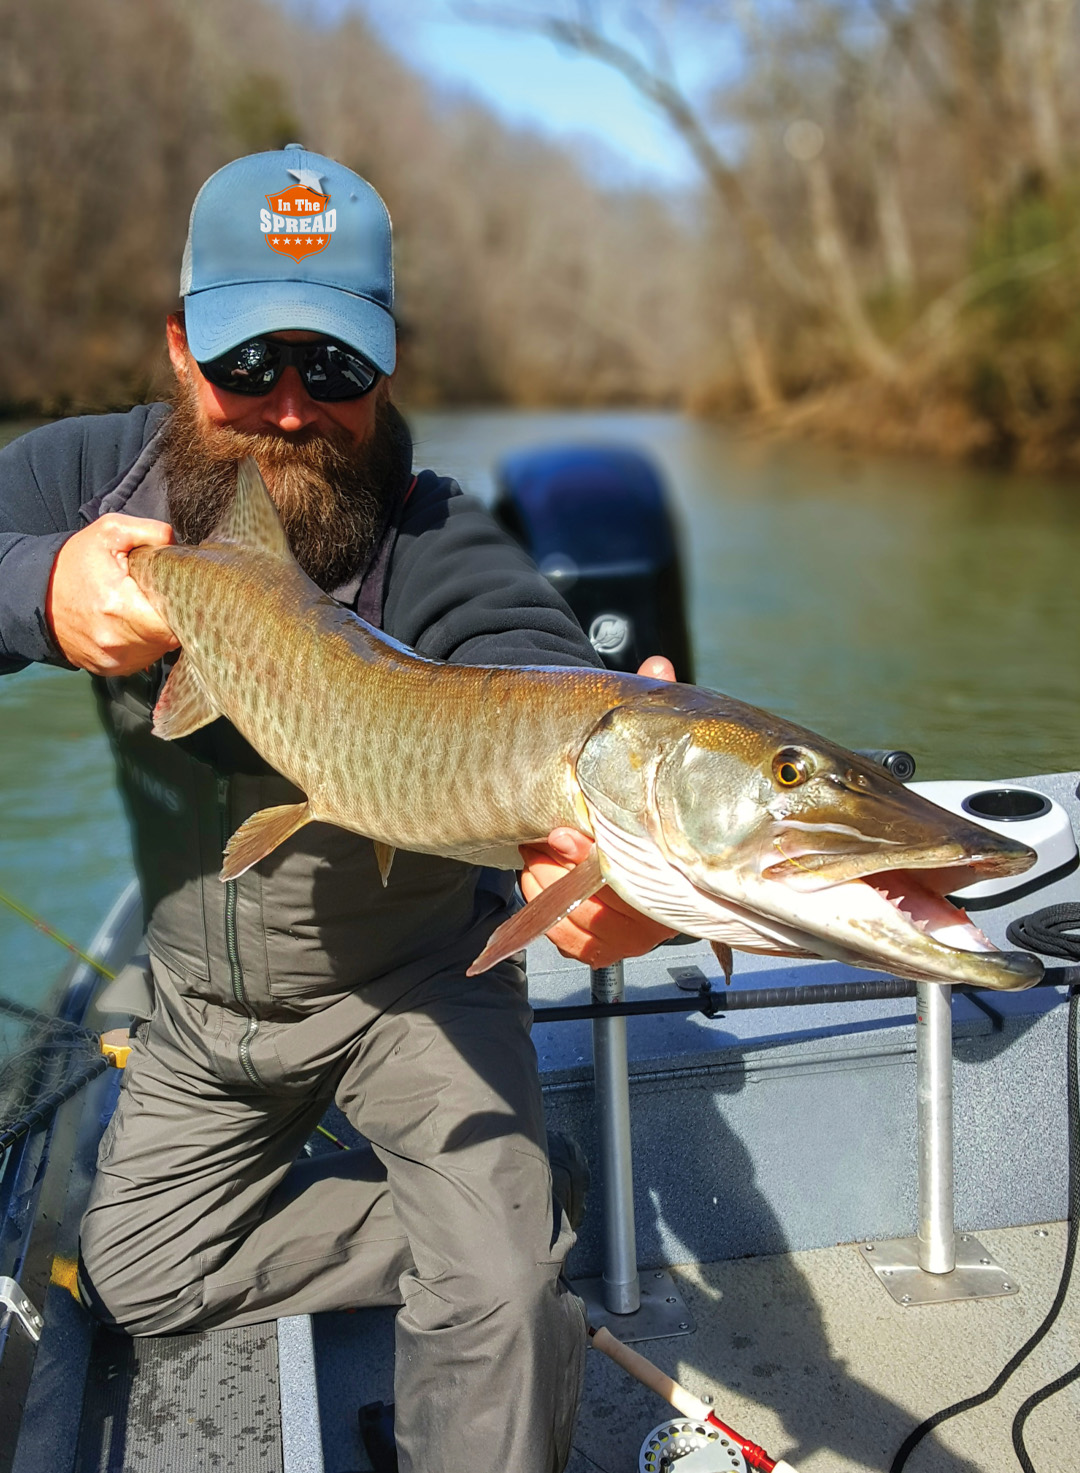 Muskie Fly Fishing Gear with Chad Bryson, In The Spread